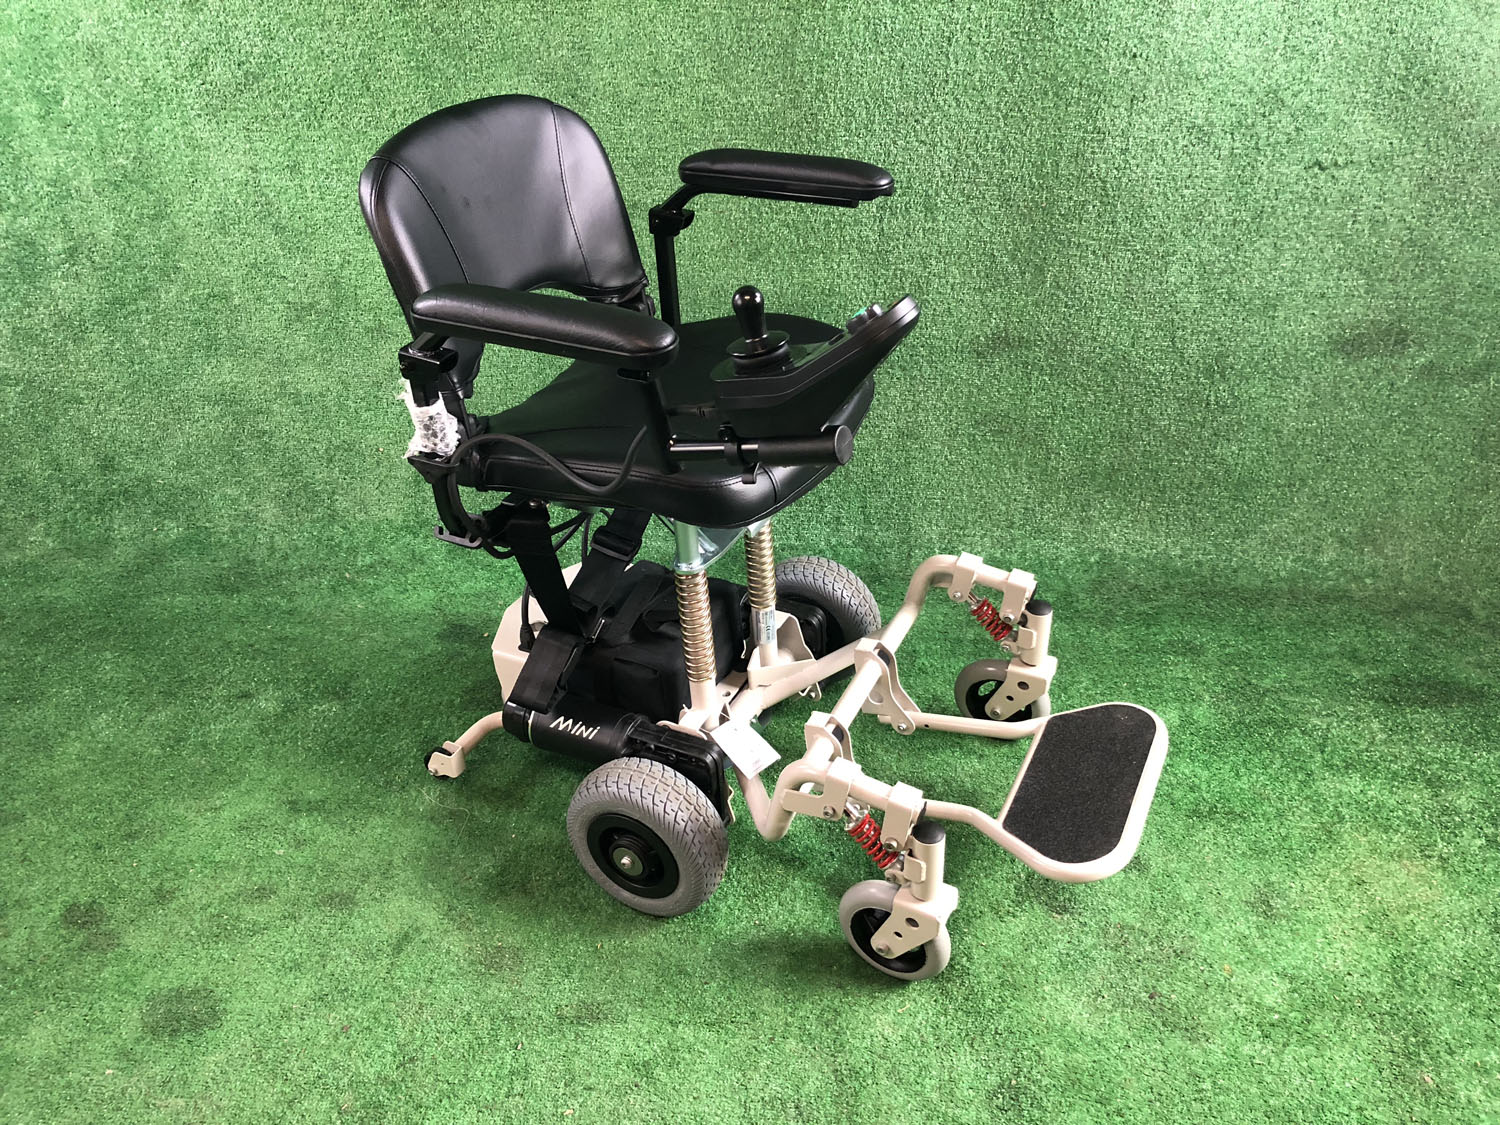 New SupaChair Mini Lightweight Transportable Powerchair with Suspension